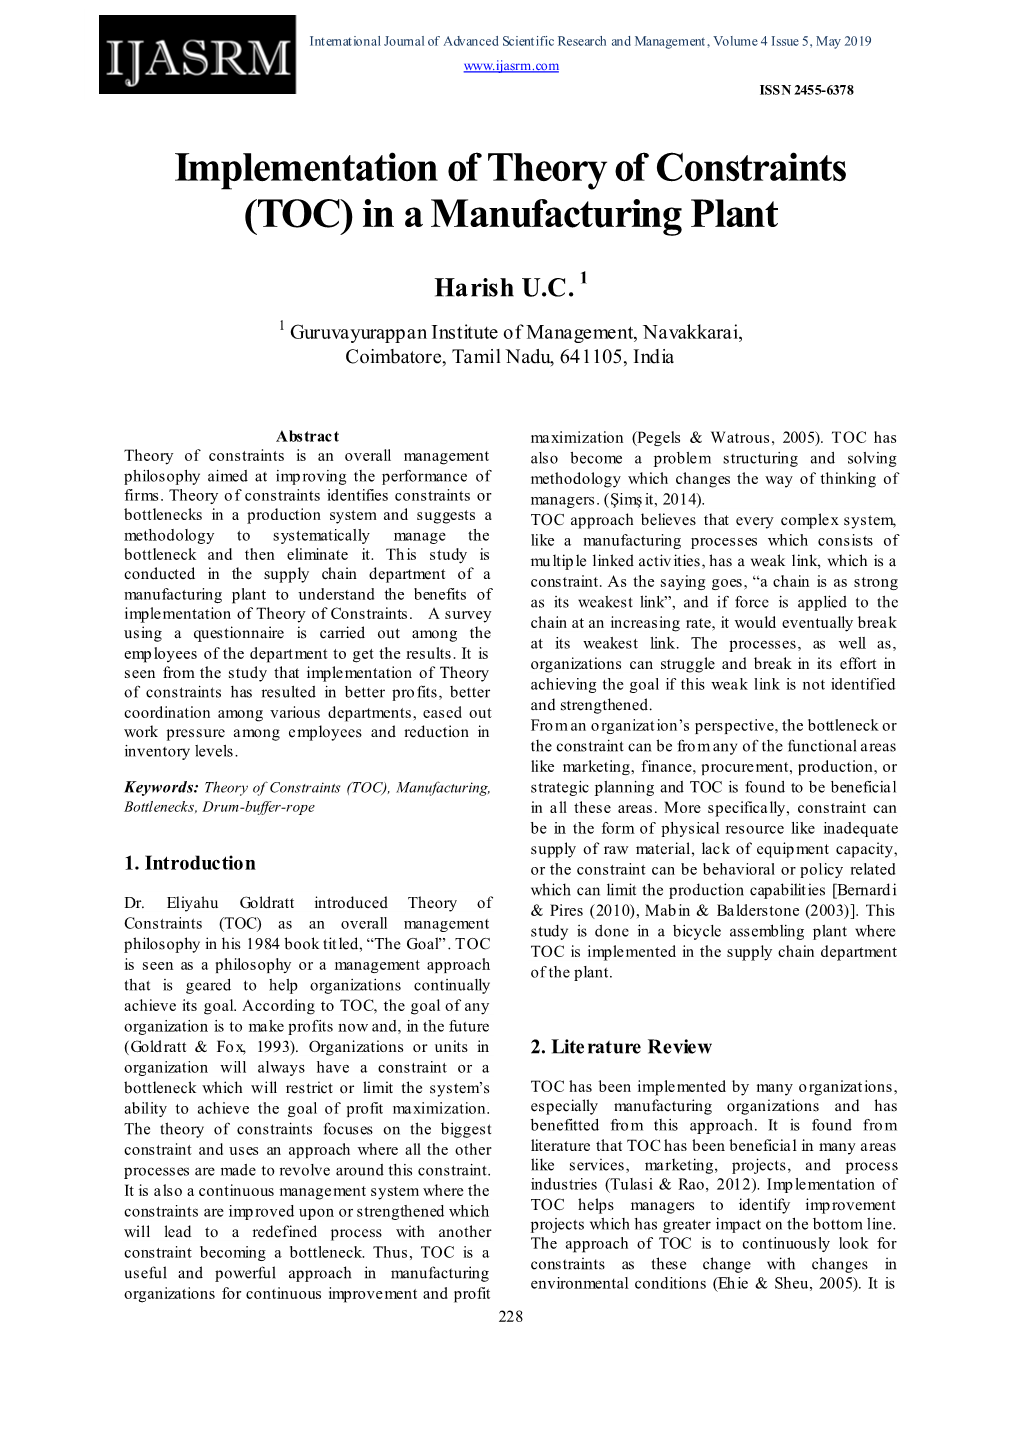 Implementation of Theory of Constraints (TOC) in a Manufacturing Plant